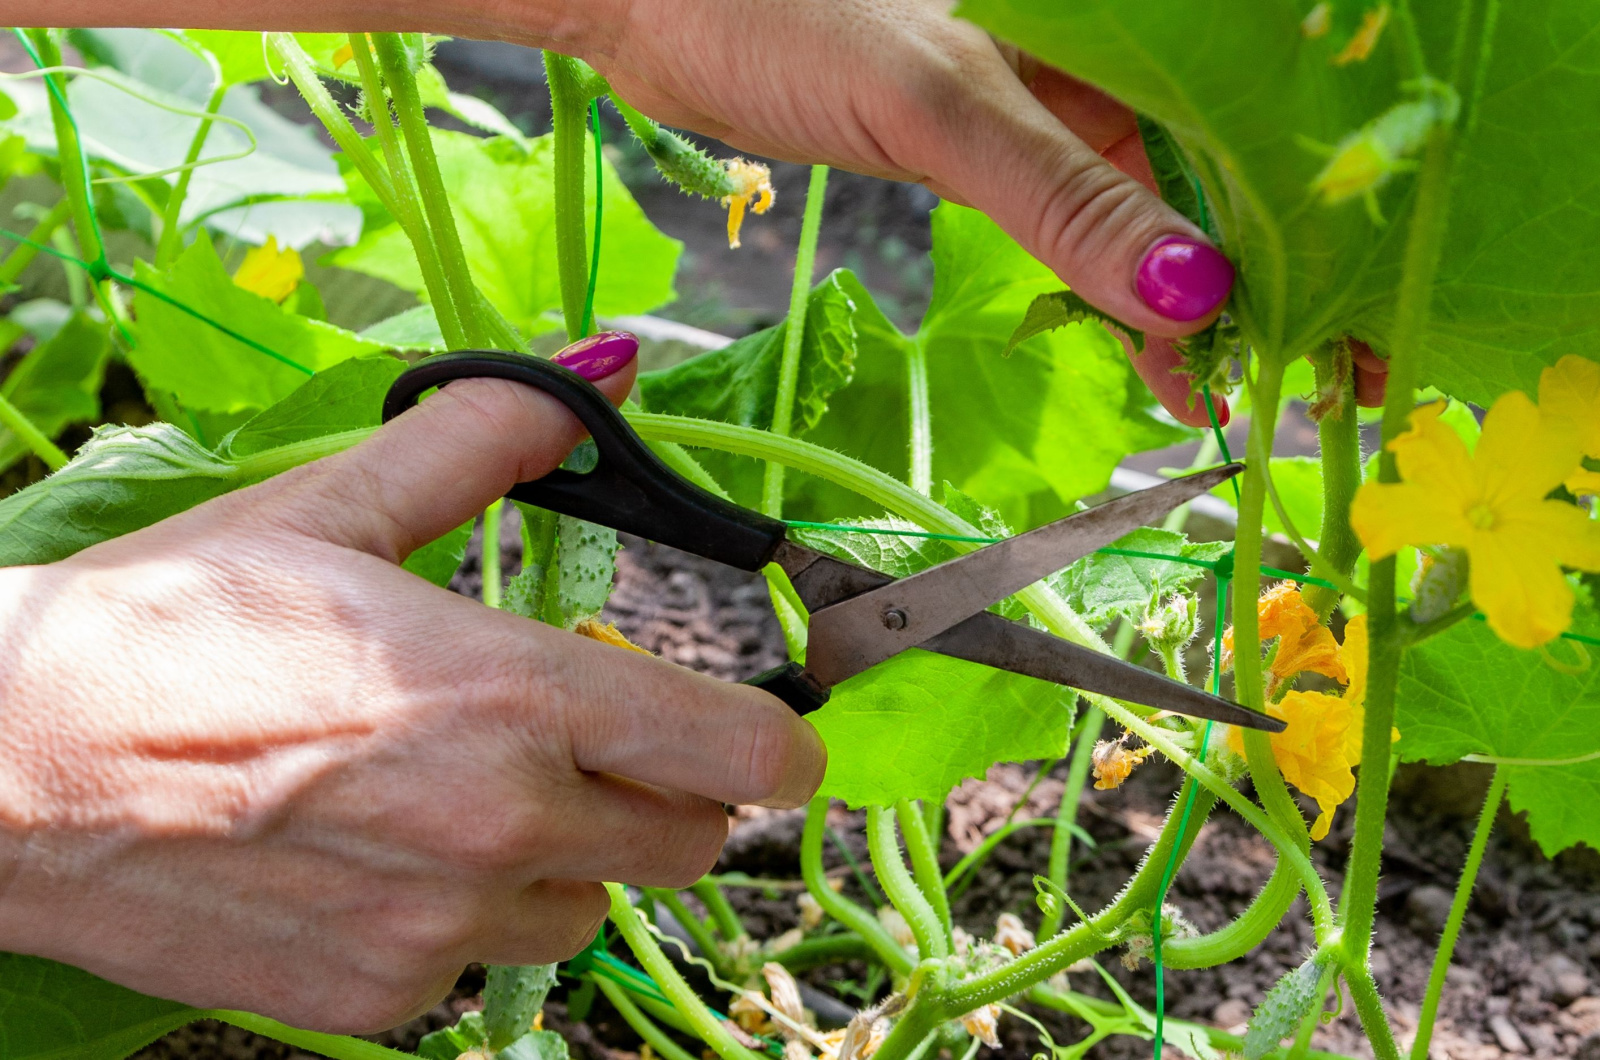 Pruning suckers on cucumbers in the greenhouse with scissors